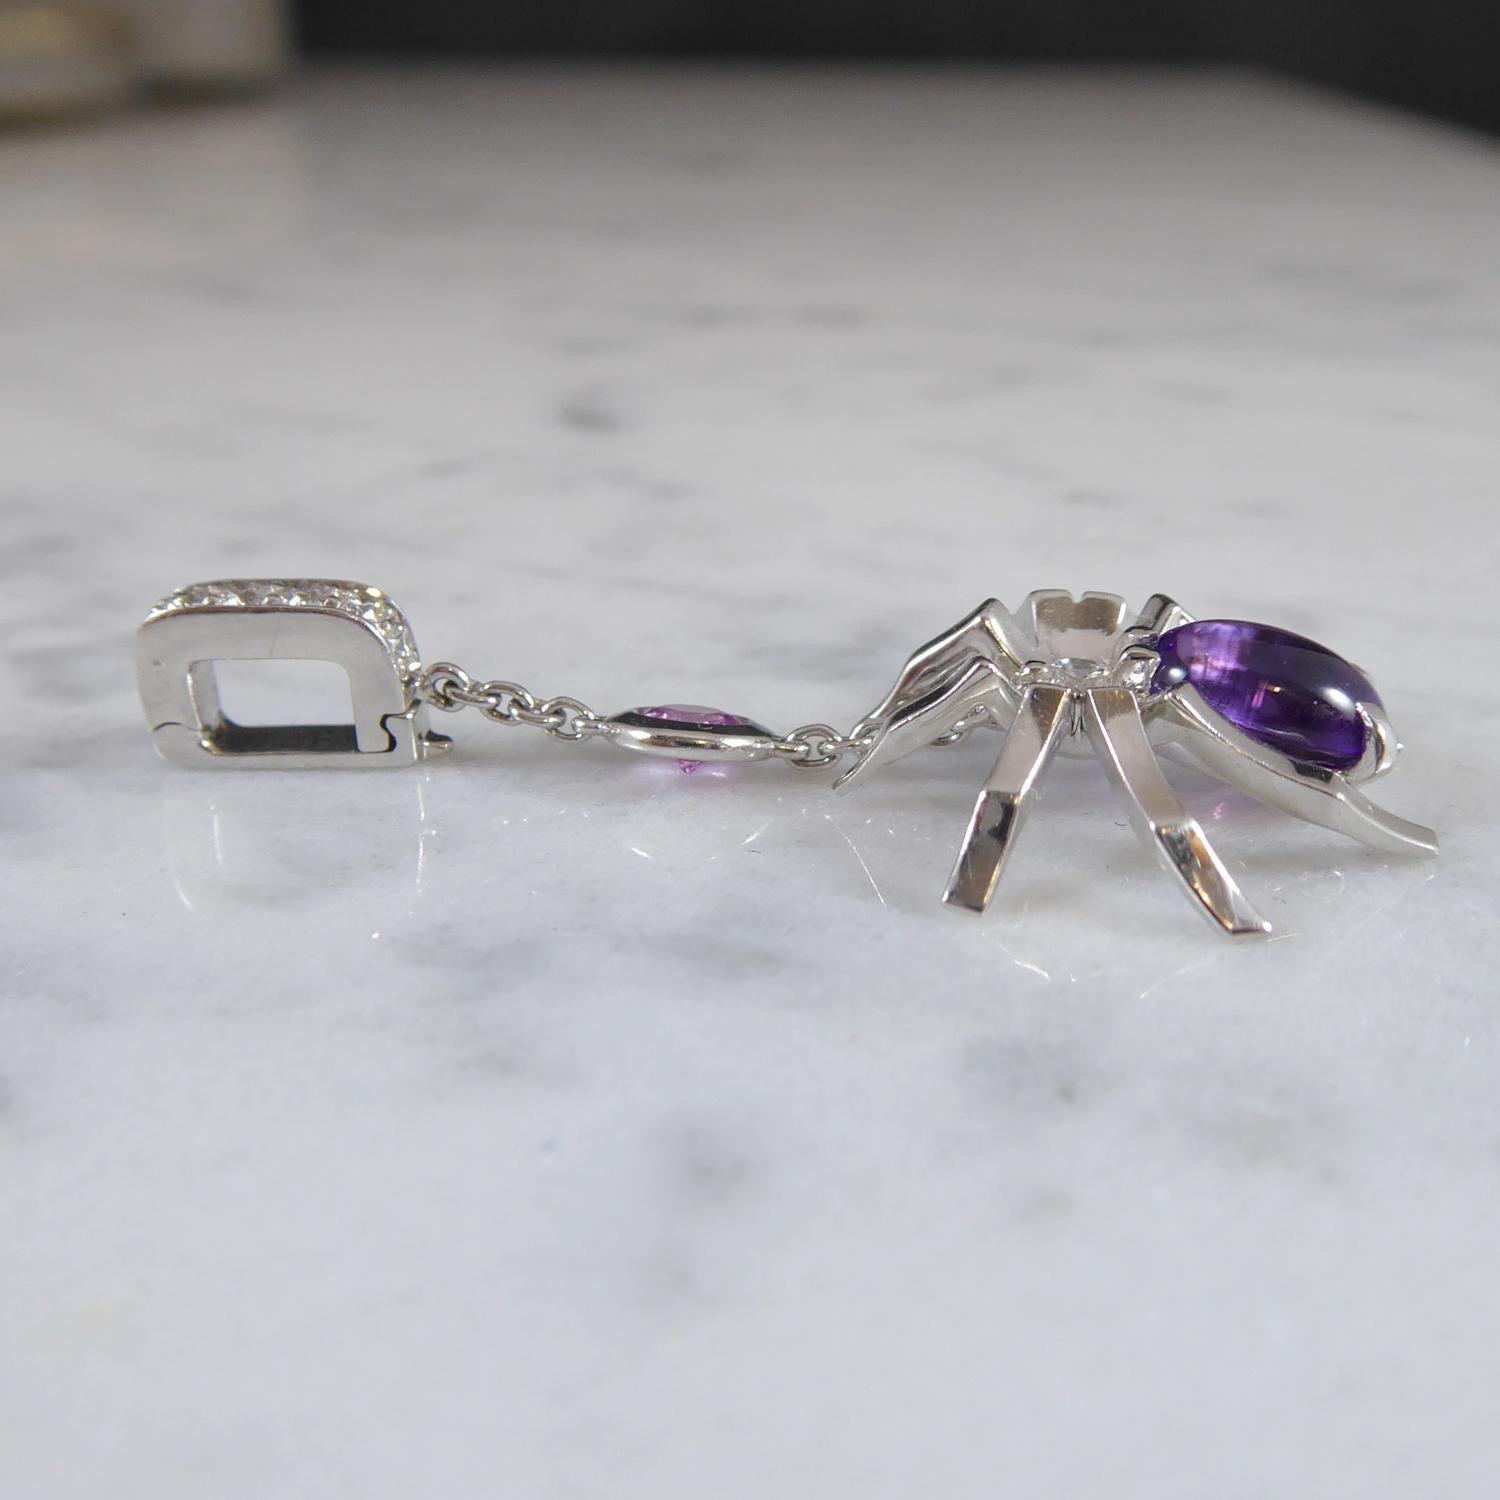 Women's Chaumet Attrape-Moi Earrings, Diamond Set Spider's Web with Amethyst Spider